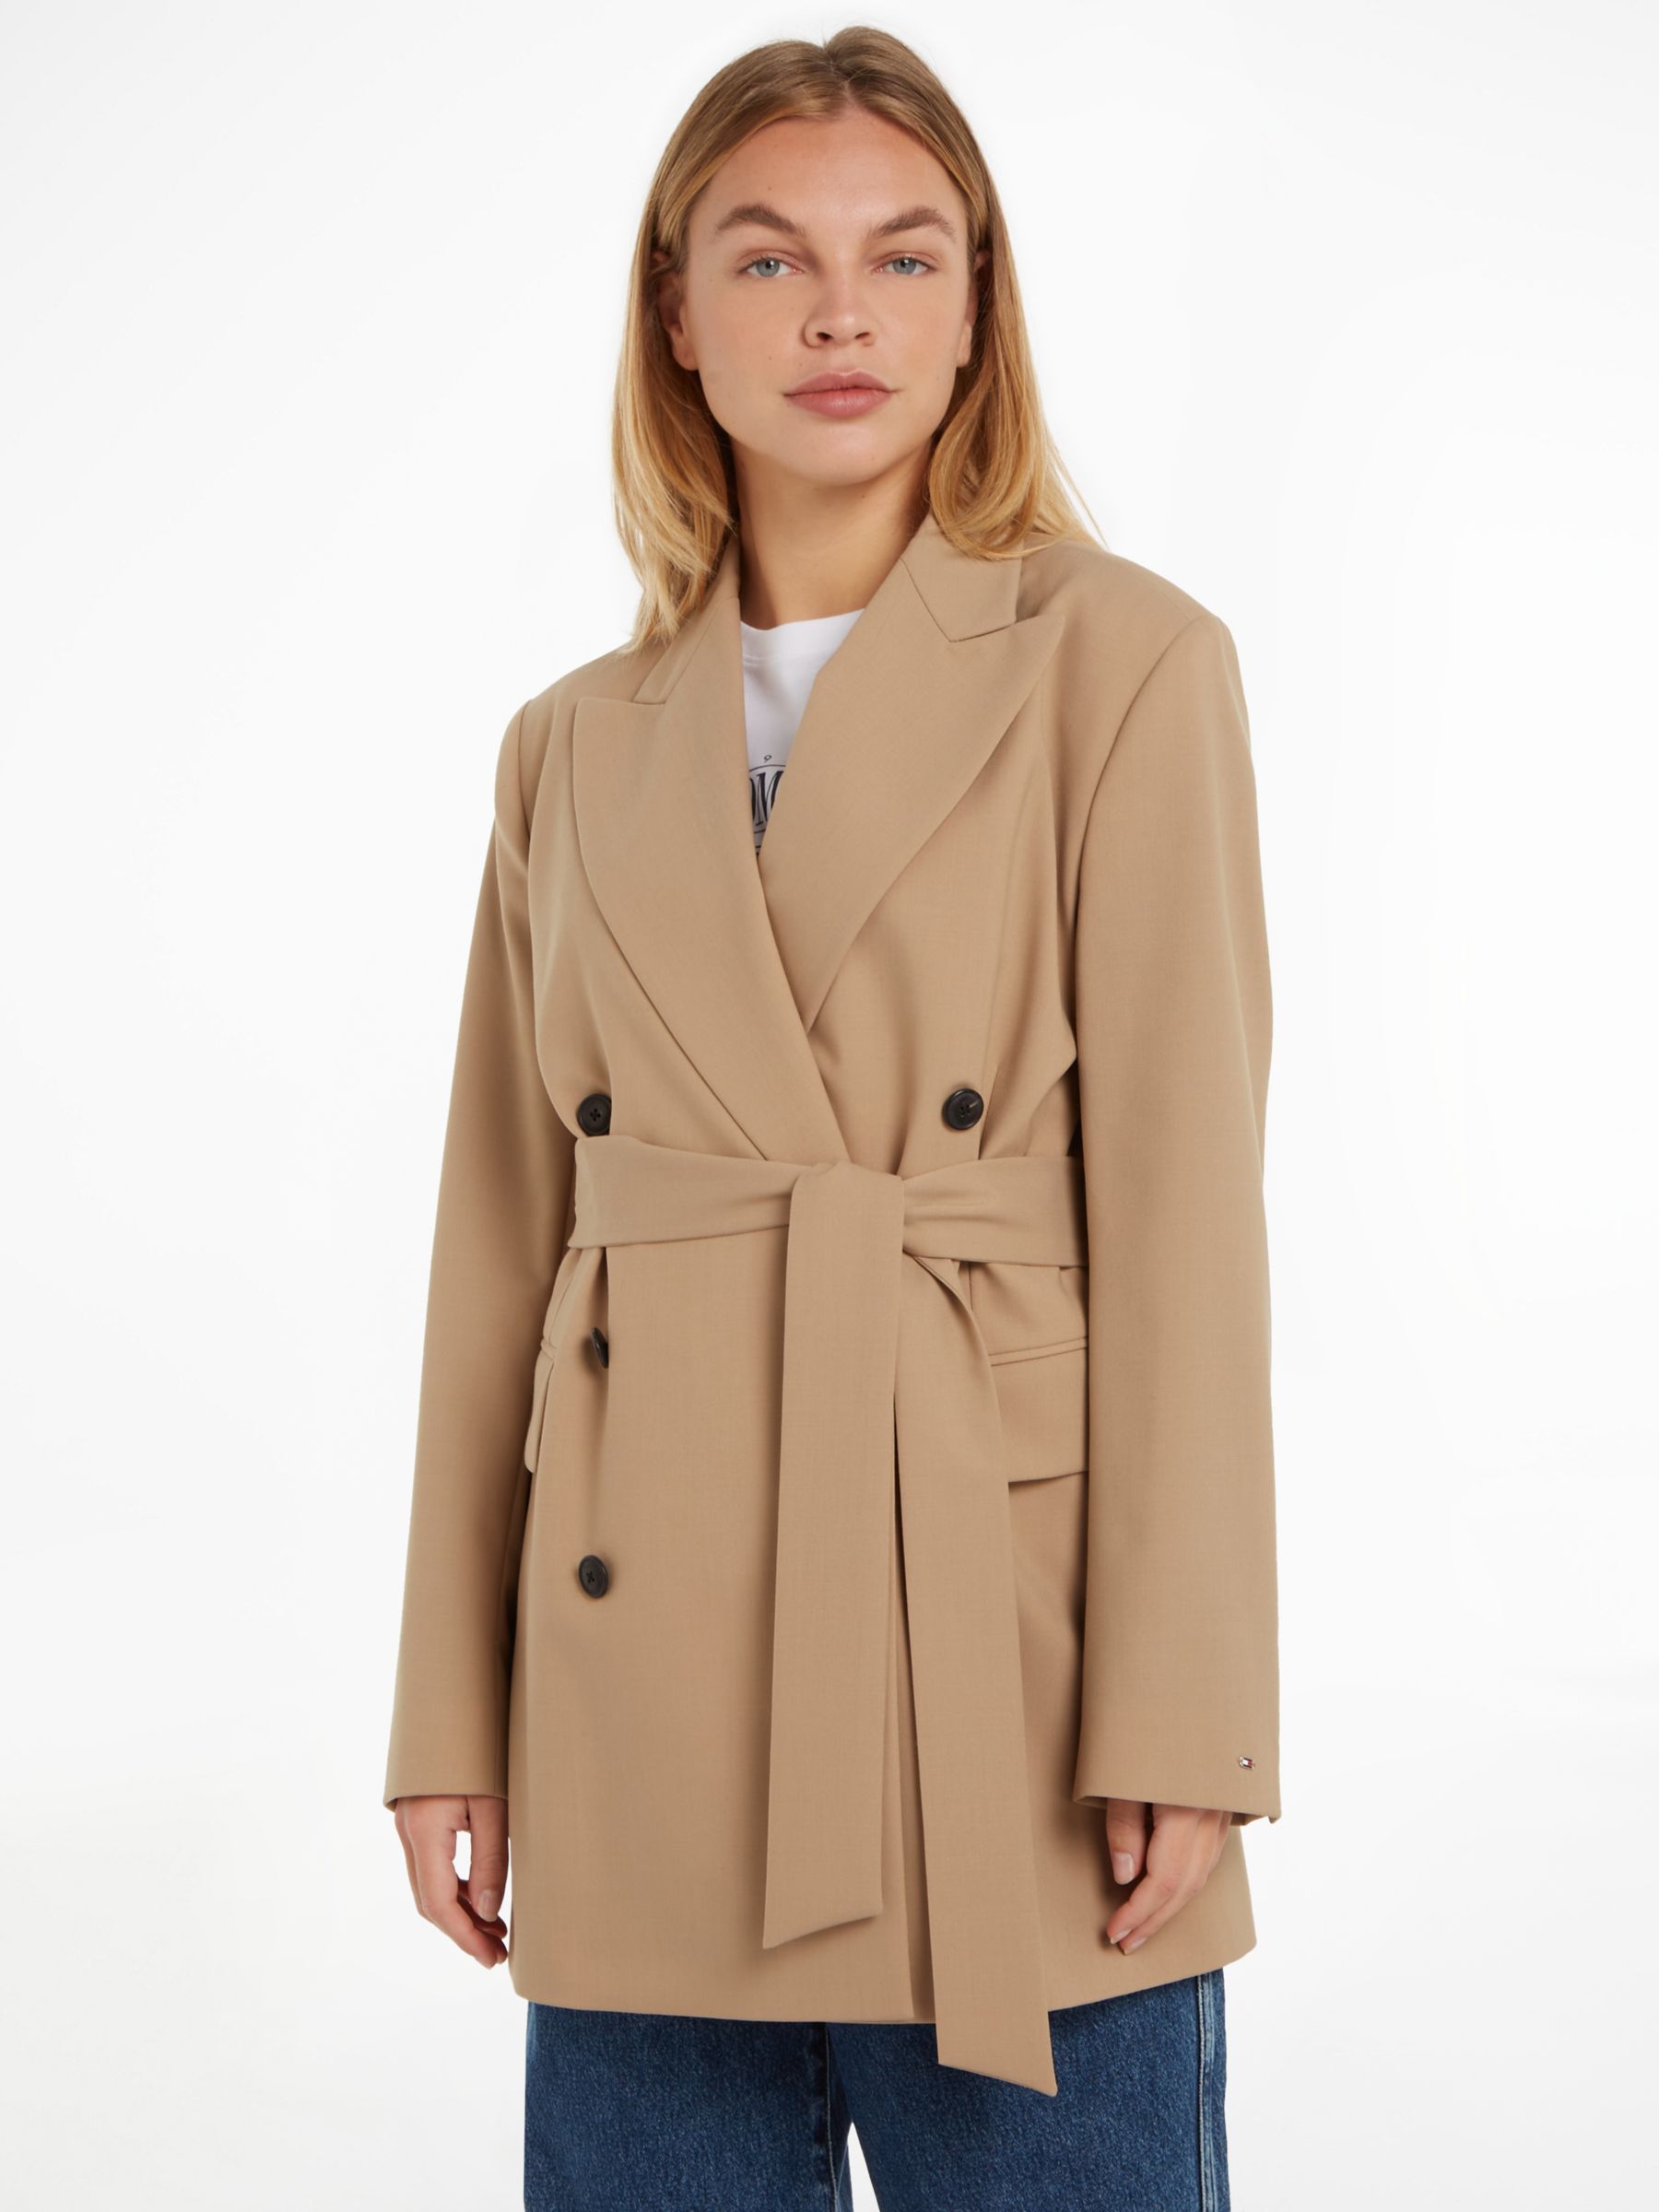 Tommy Hilfiger Double Wool Blend Coat, Classic at John Lewis Partners